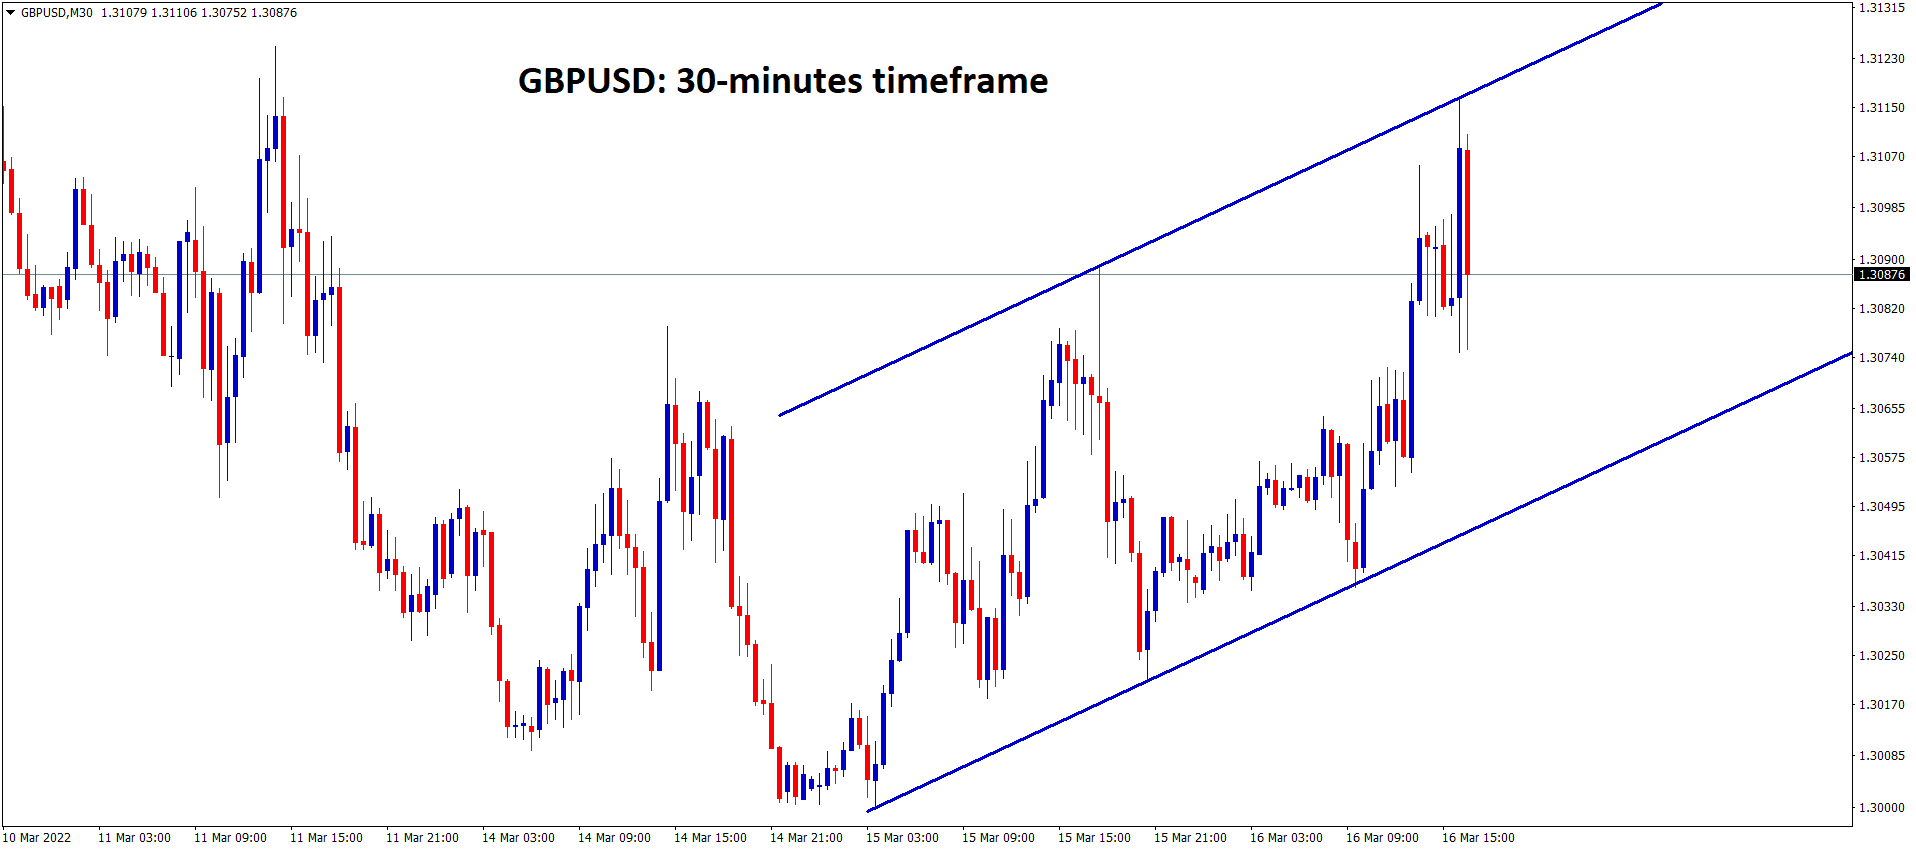 GBPUSD moving in an ascending channel in the 30 minutes chart